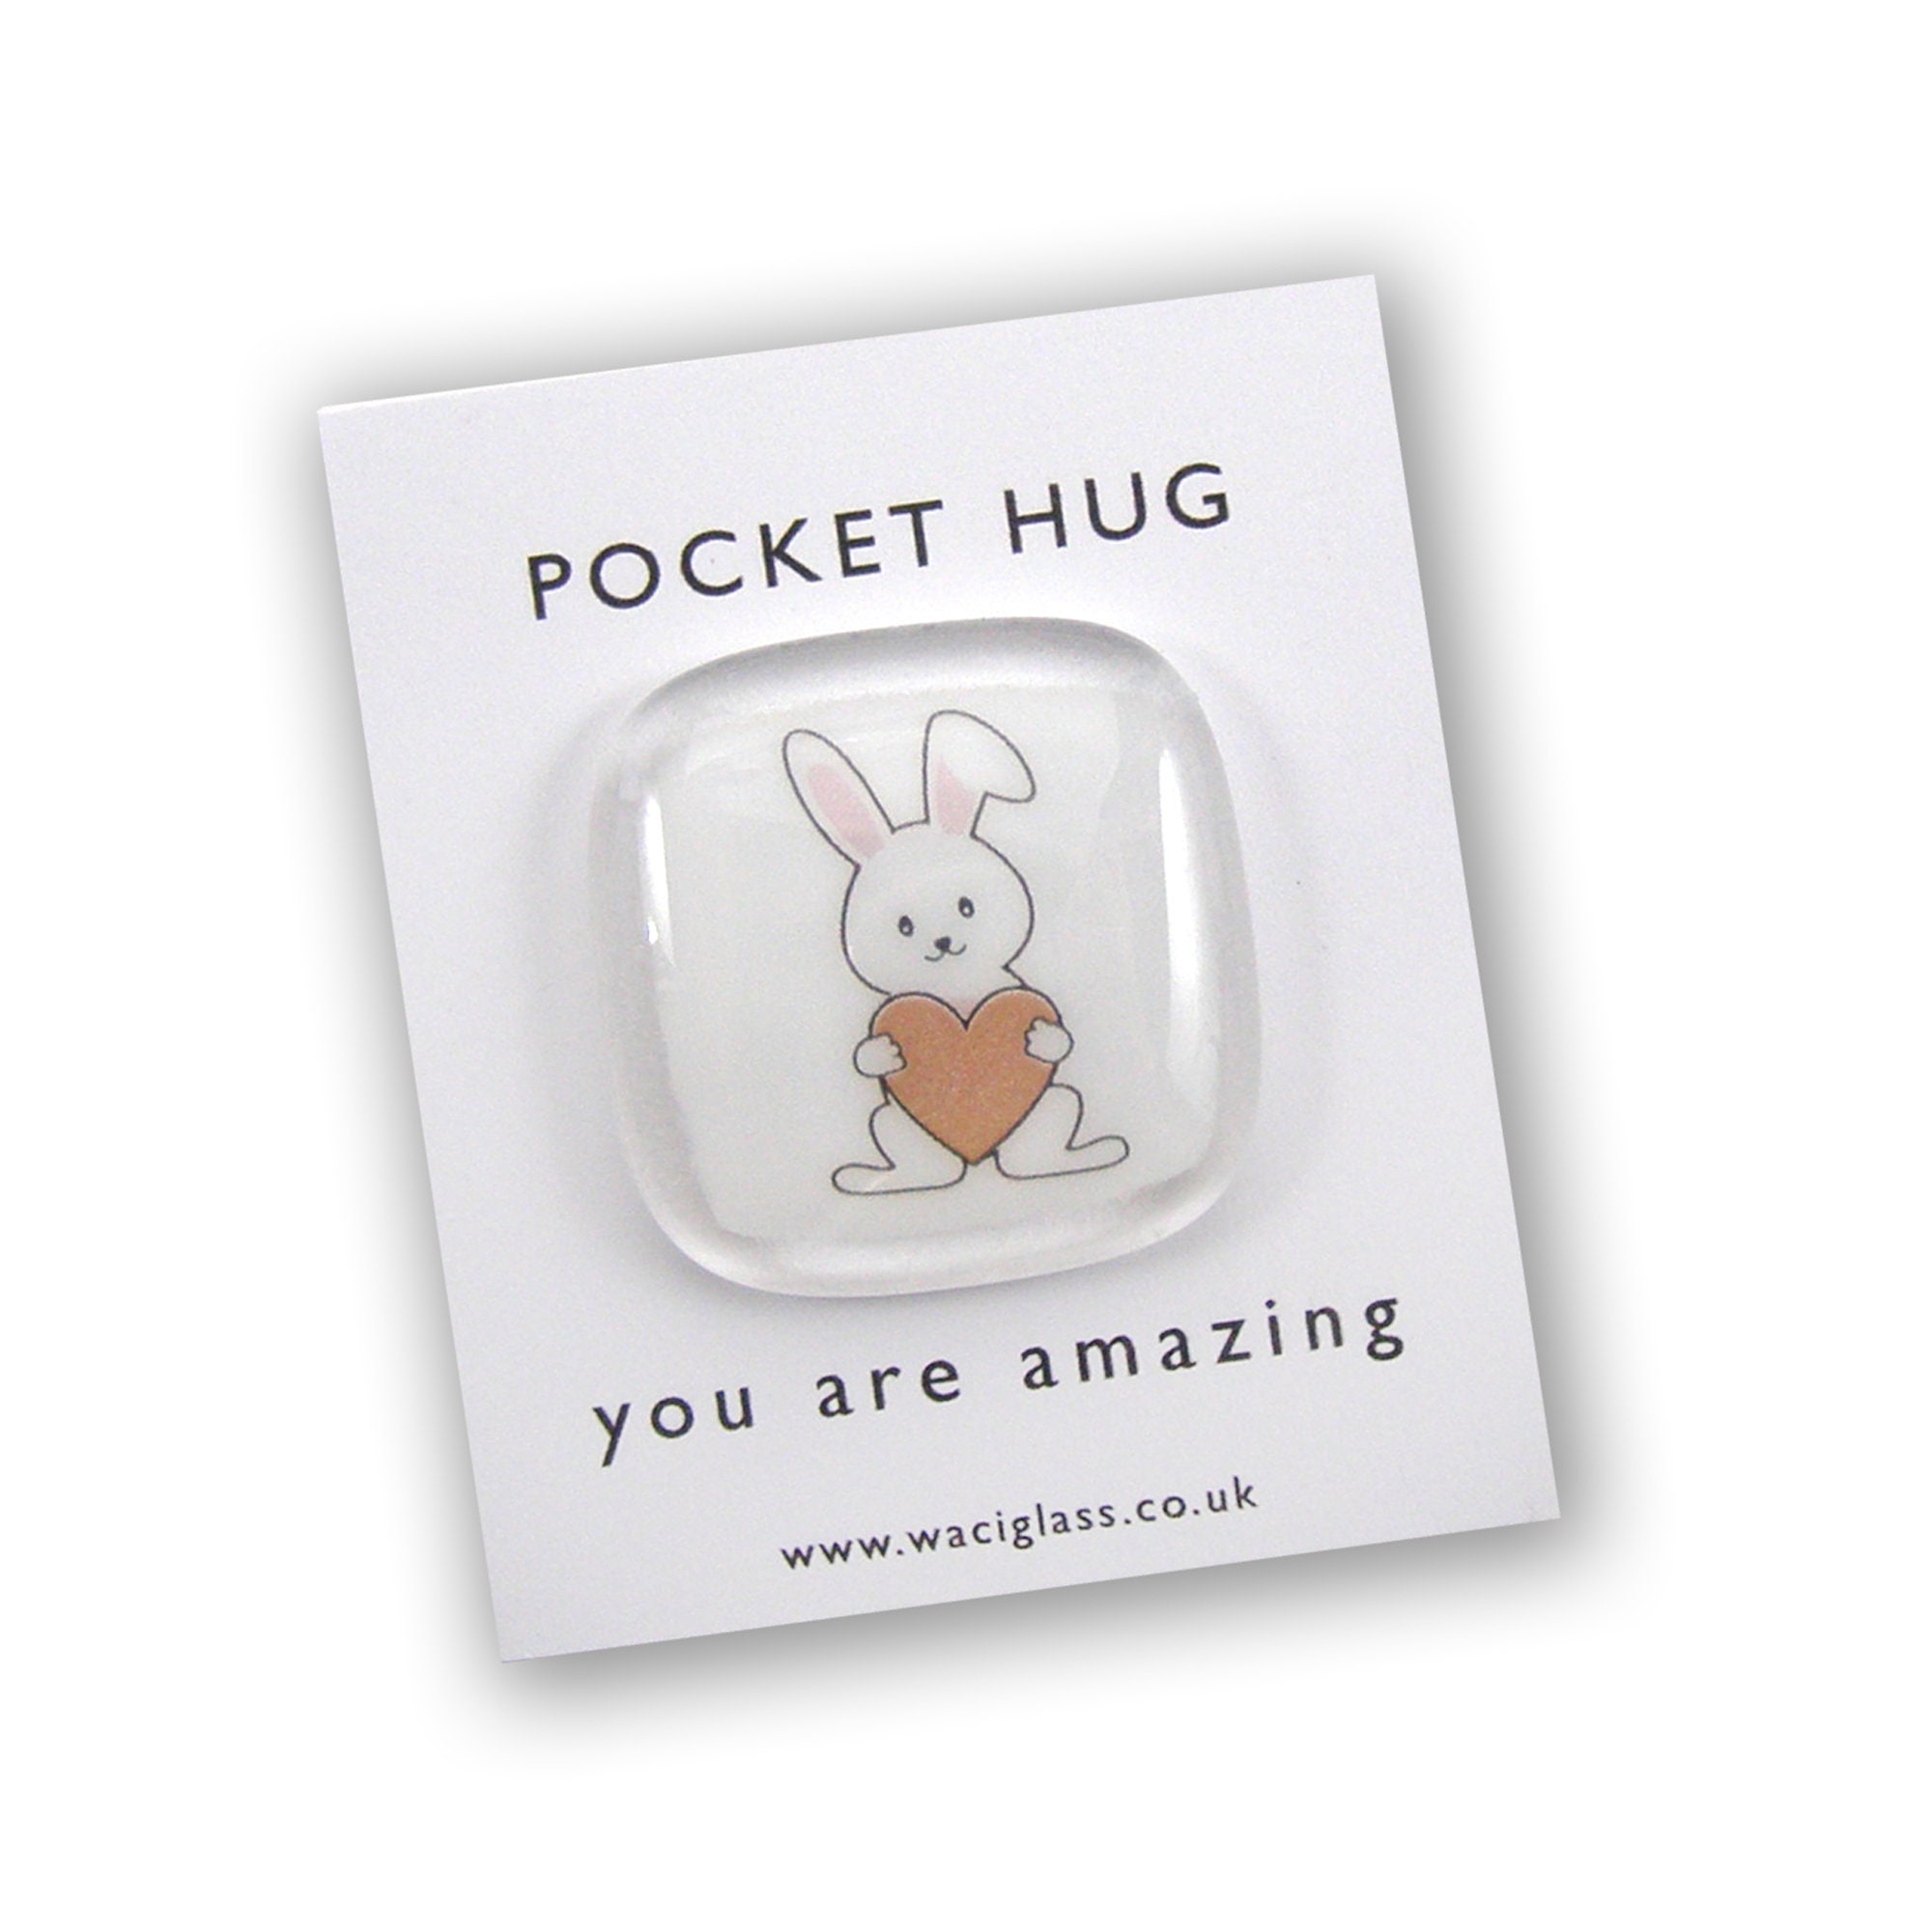 With Love Pocket hugs – Nuvue Glass Design